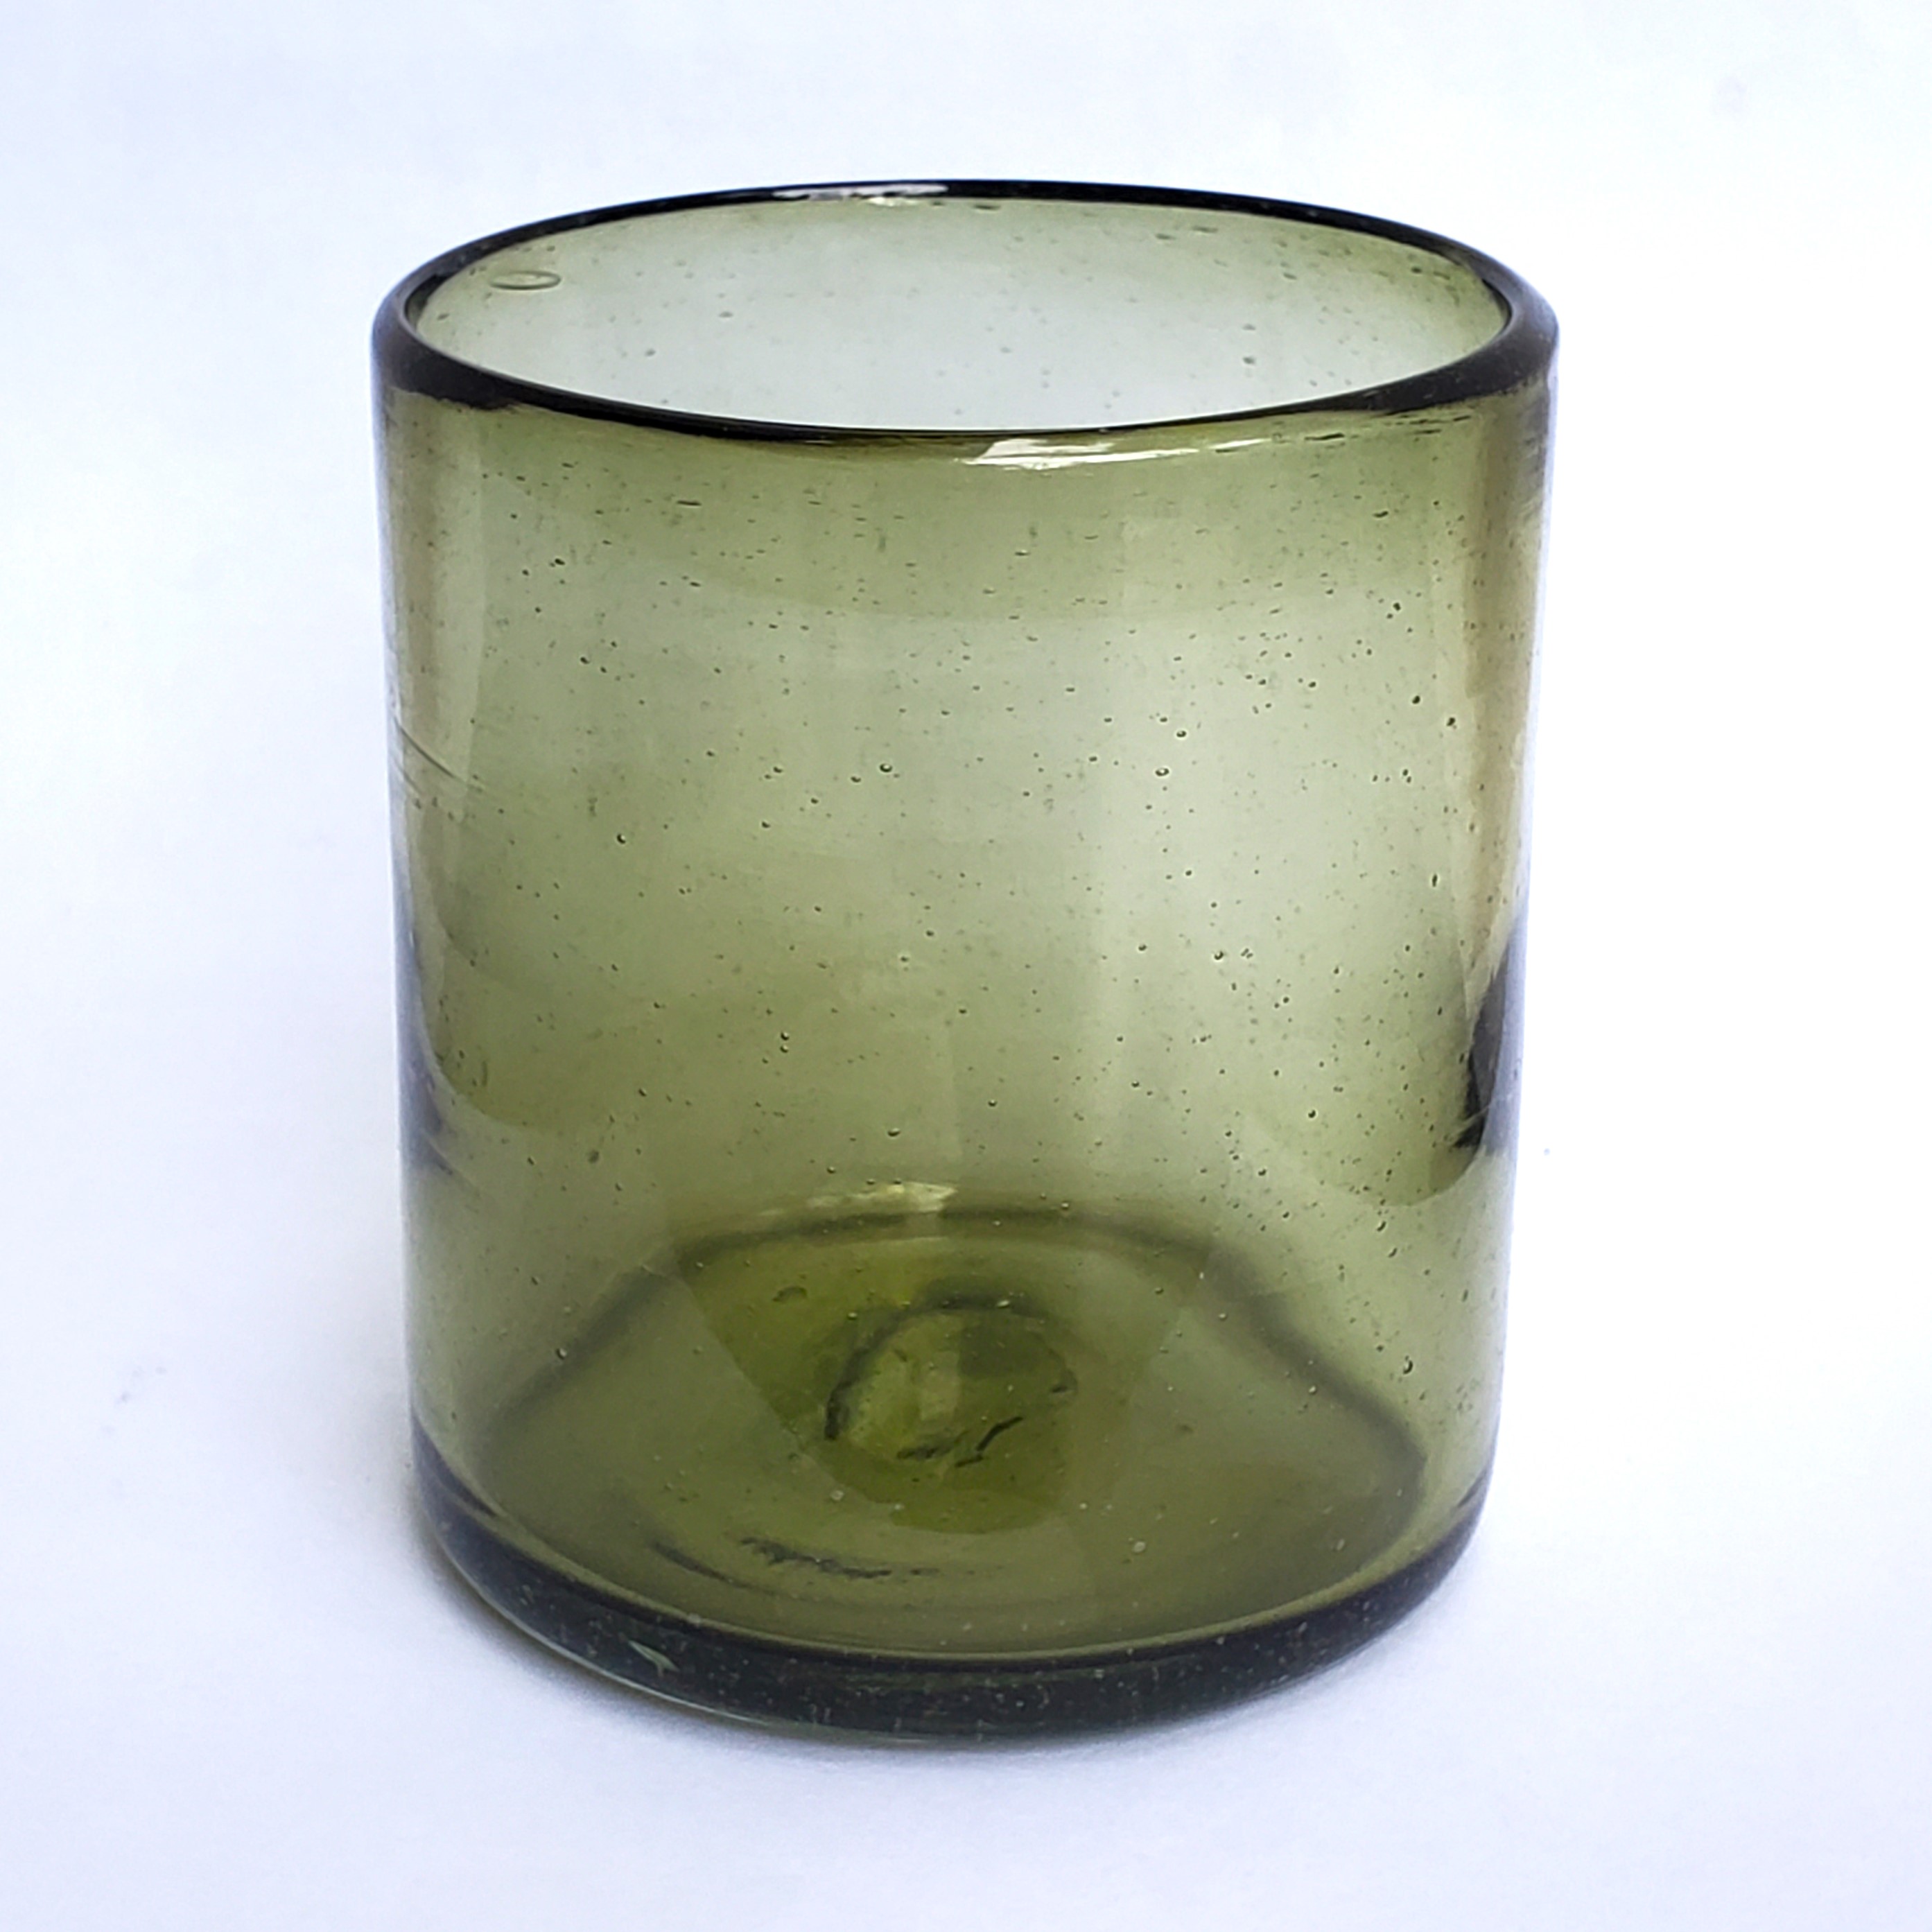 Novedades / Solid Olive Green 9 oz Short Tumblers (set of 6) / Enhance your table setting with our beautiful Olive Green colored glasses.